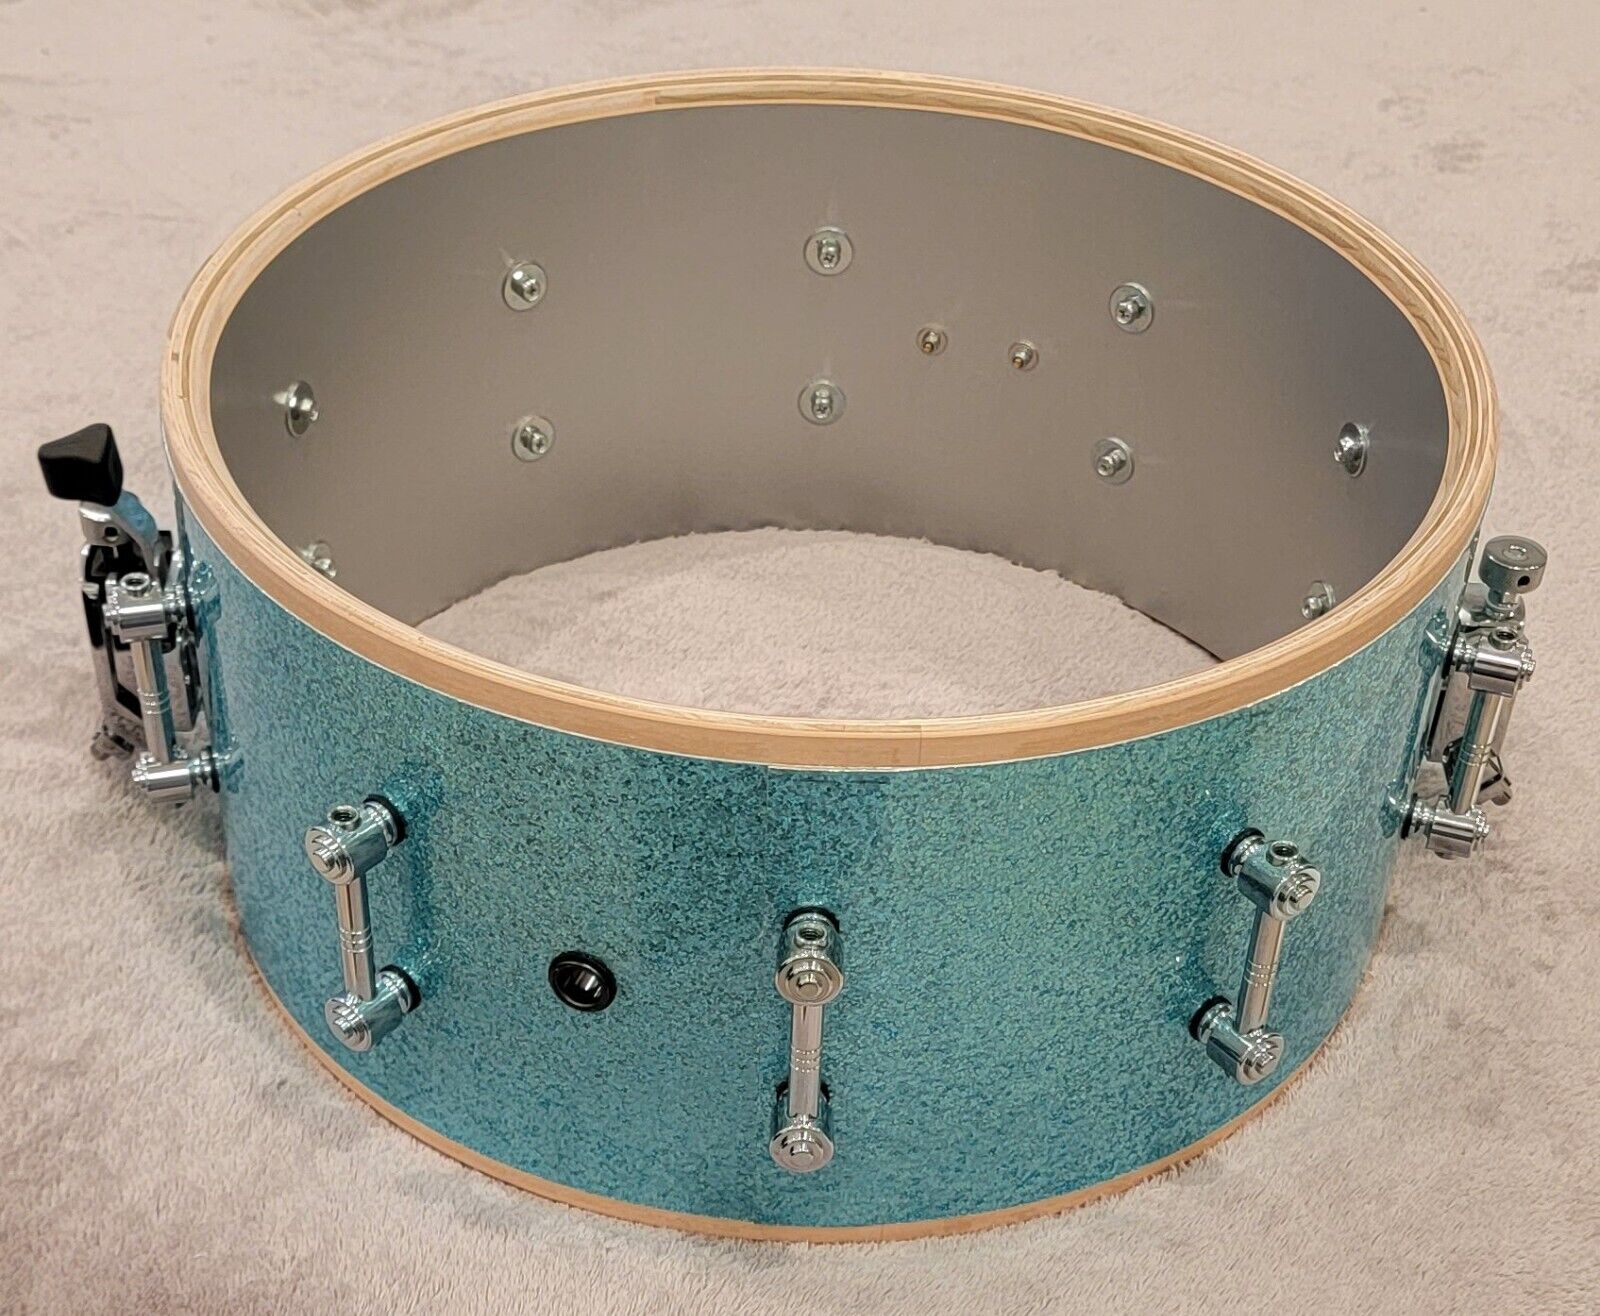 Gretsch New Classic Maple 2012 Limited Reserve 4pc Shell Pack Turquoise Sparkle! 9